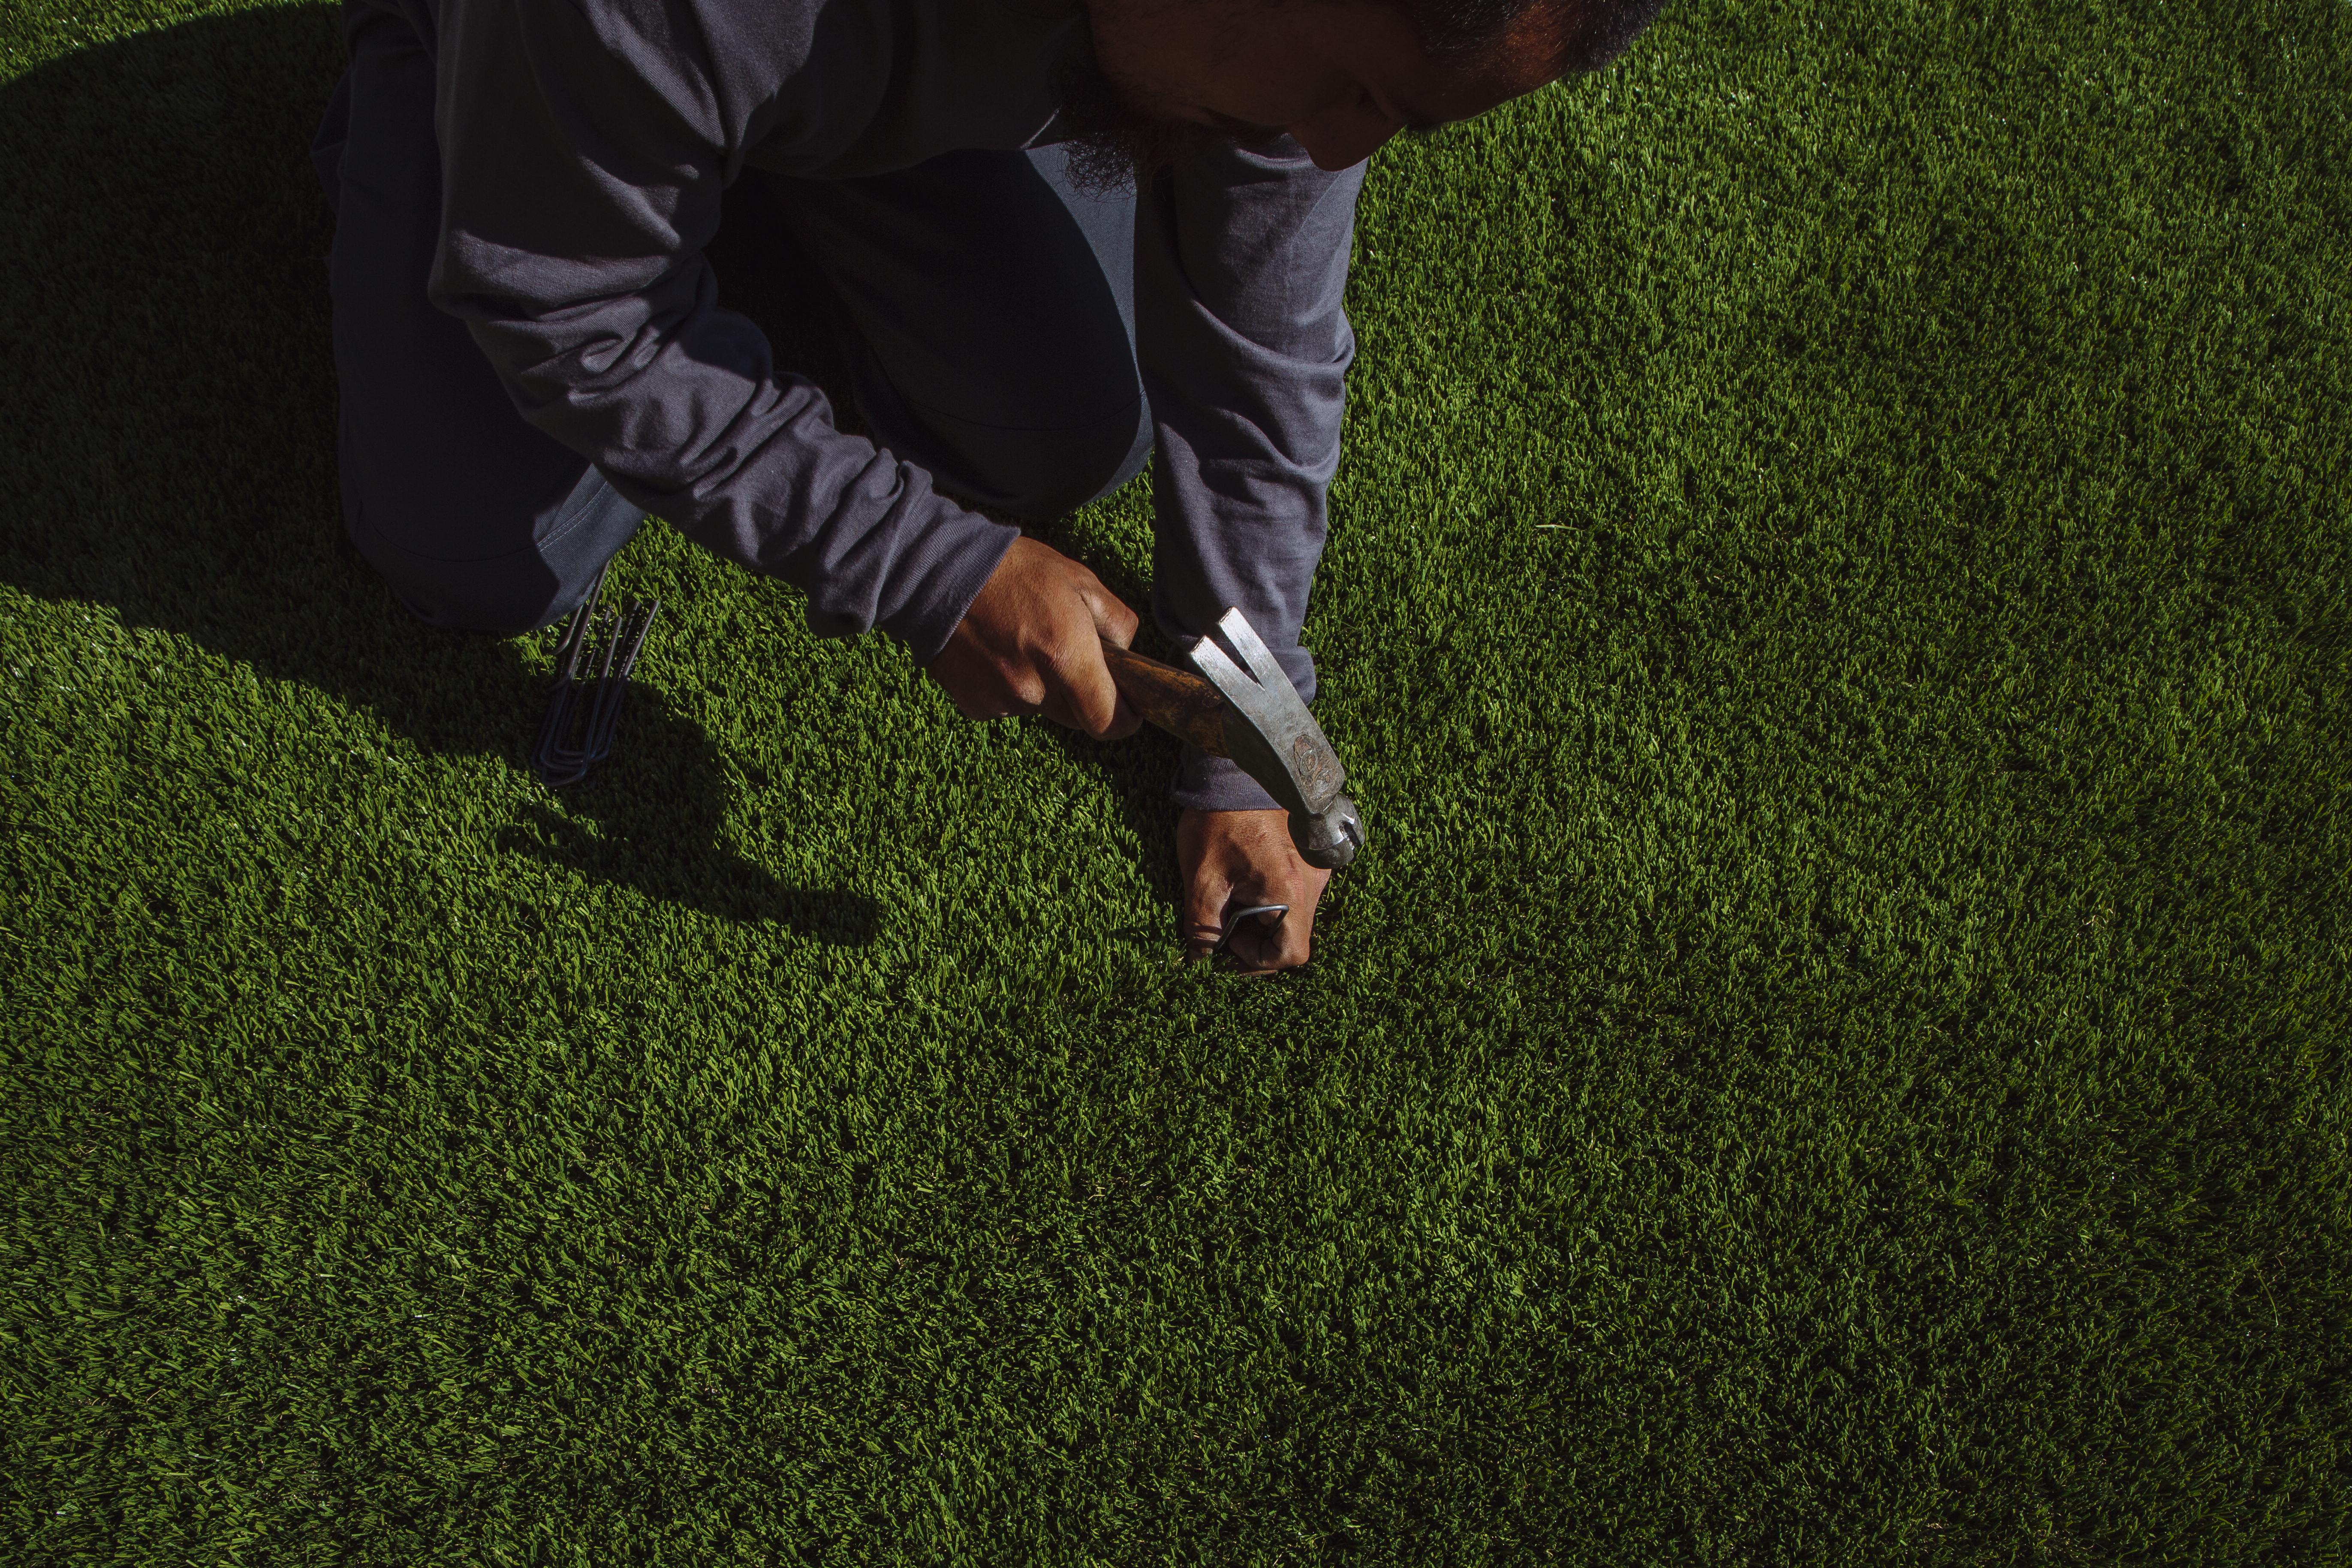 A man nails artificial turf down over a lawn. Here's why green synthetic lawns are catching on.